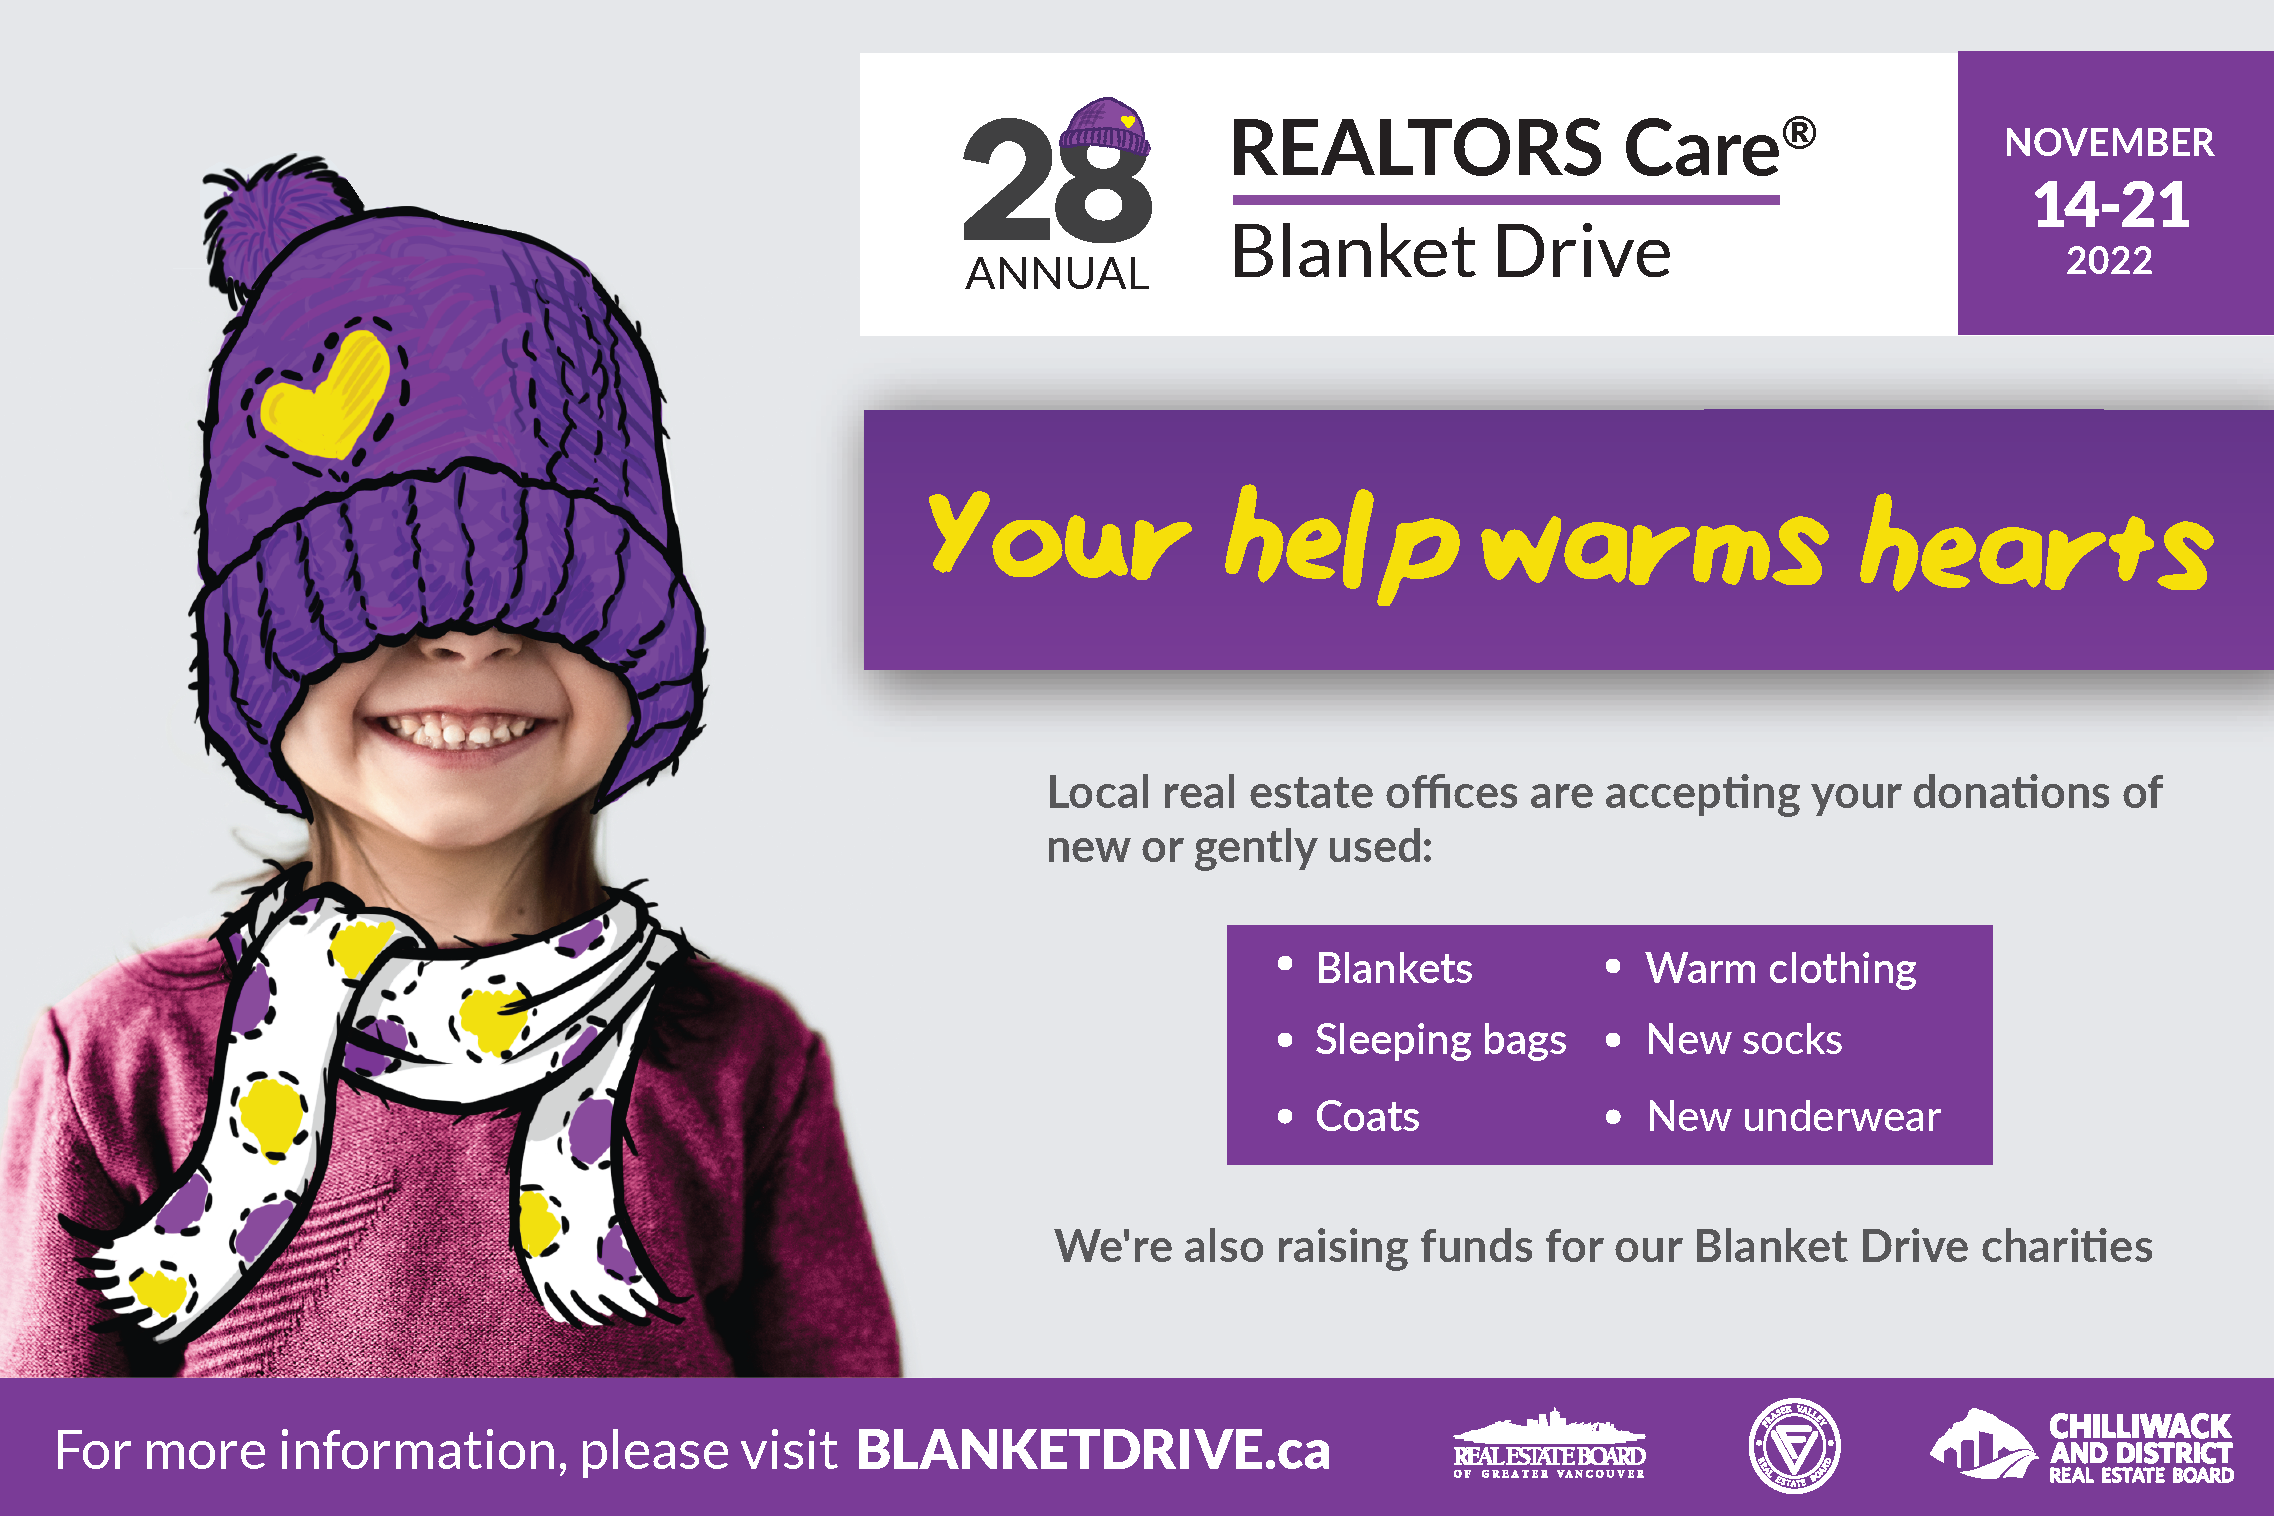 The REALTORS Care® Blanket Drive will combine its traditional collection and distribution of warm clothes and blankets this year with an online fundraiser for partner charities.